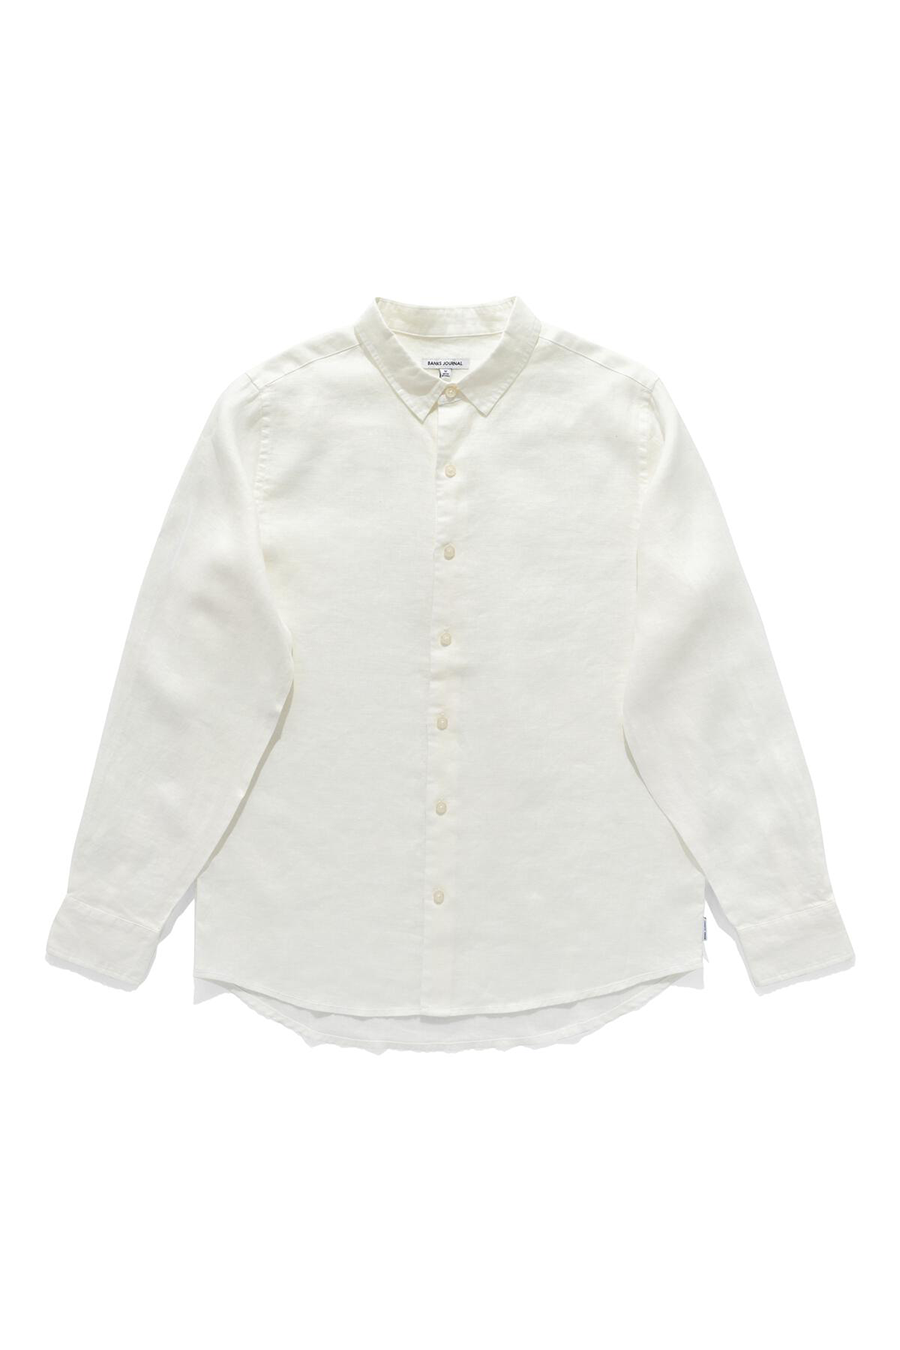 Hastings Linen Long Sleeve | Off White - Main Image Number 1 of 1